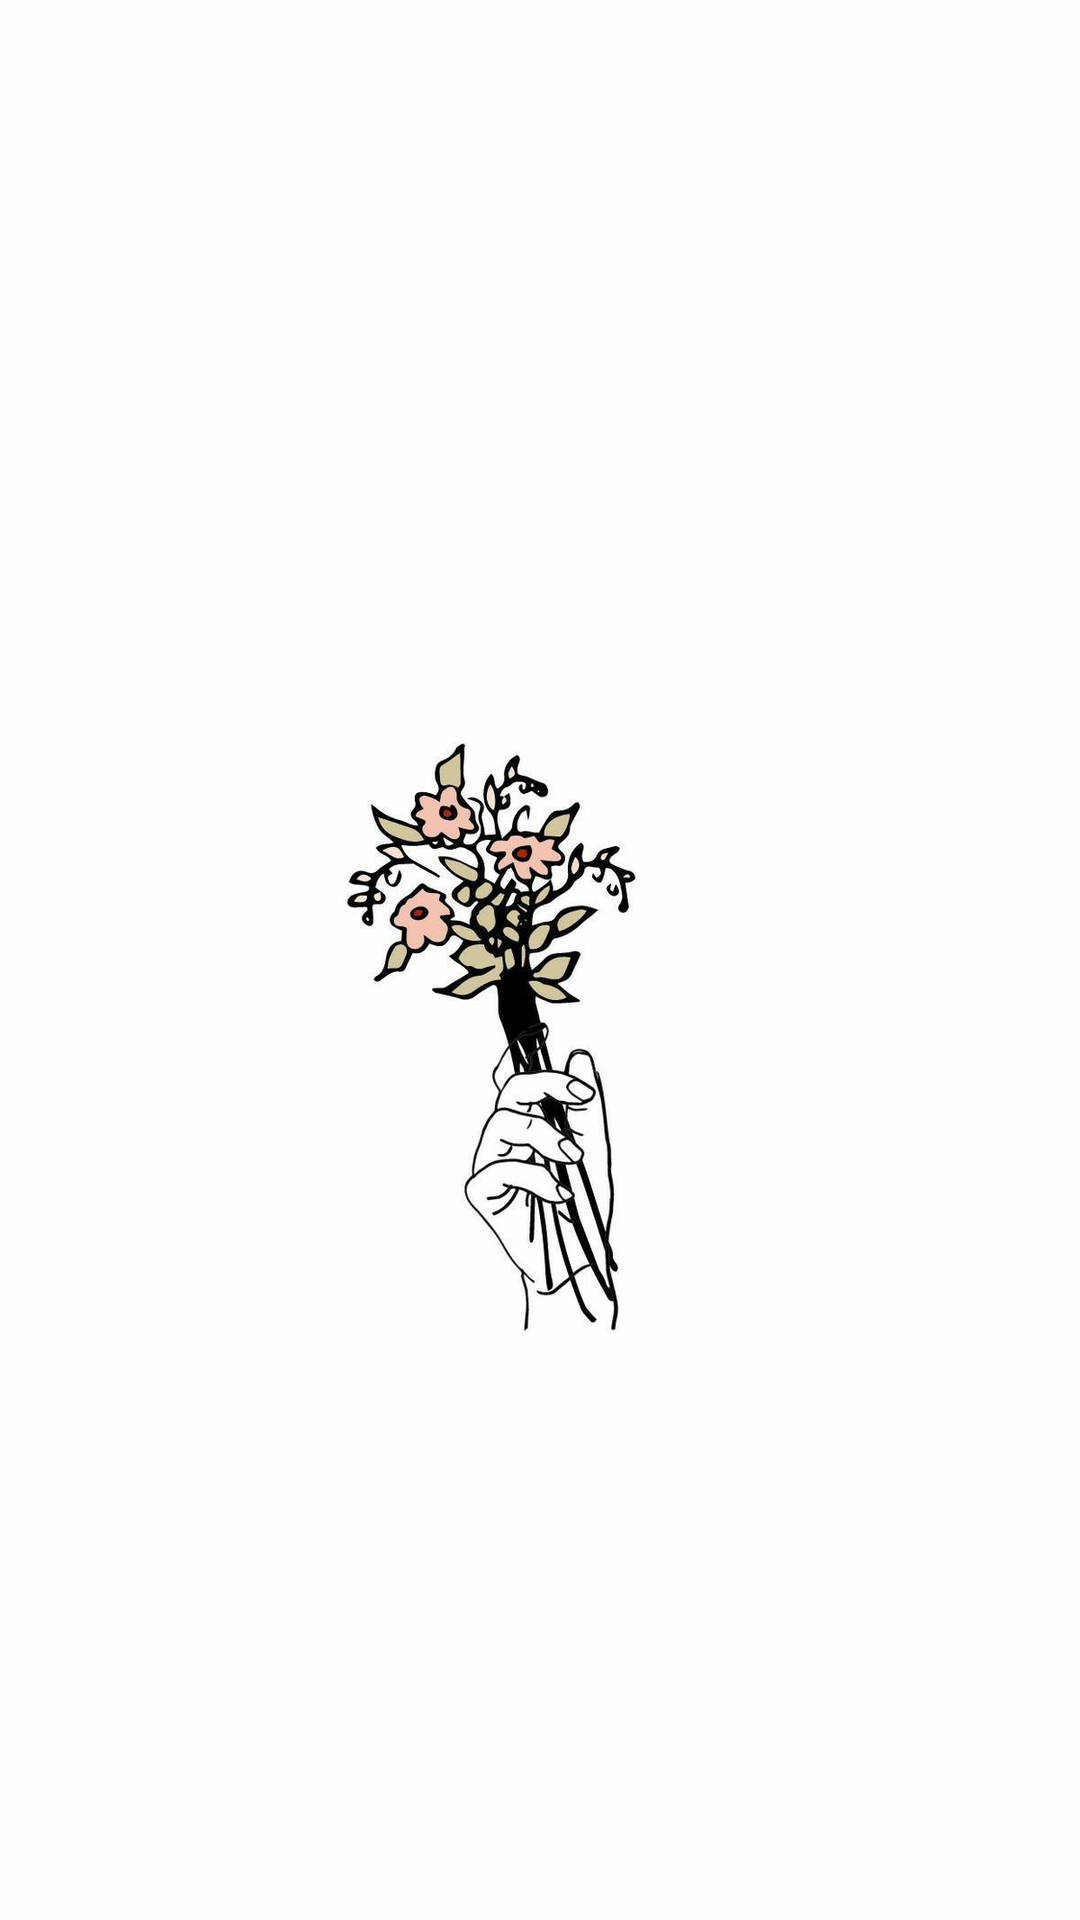 Hand Holding Flowers Aesthetic Sketches Picture